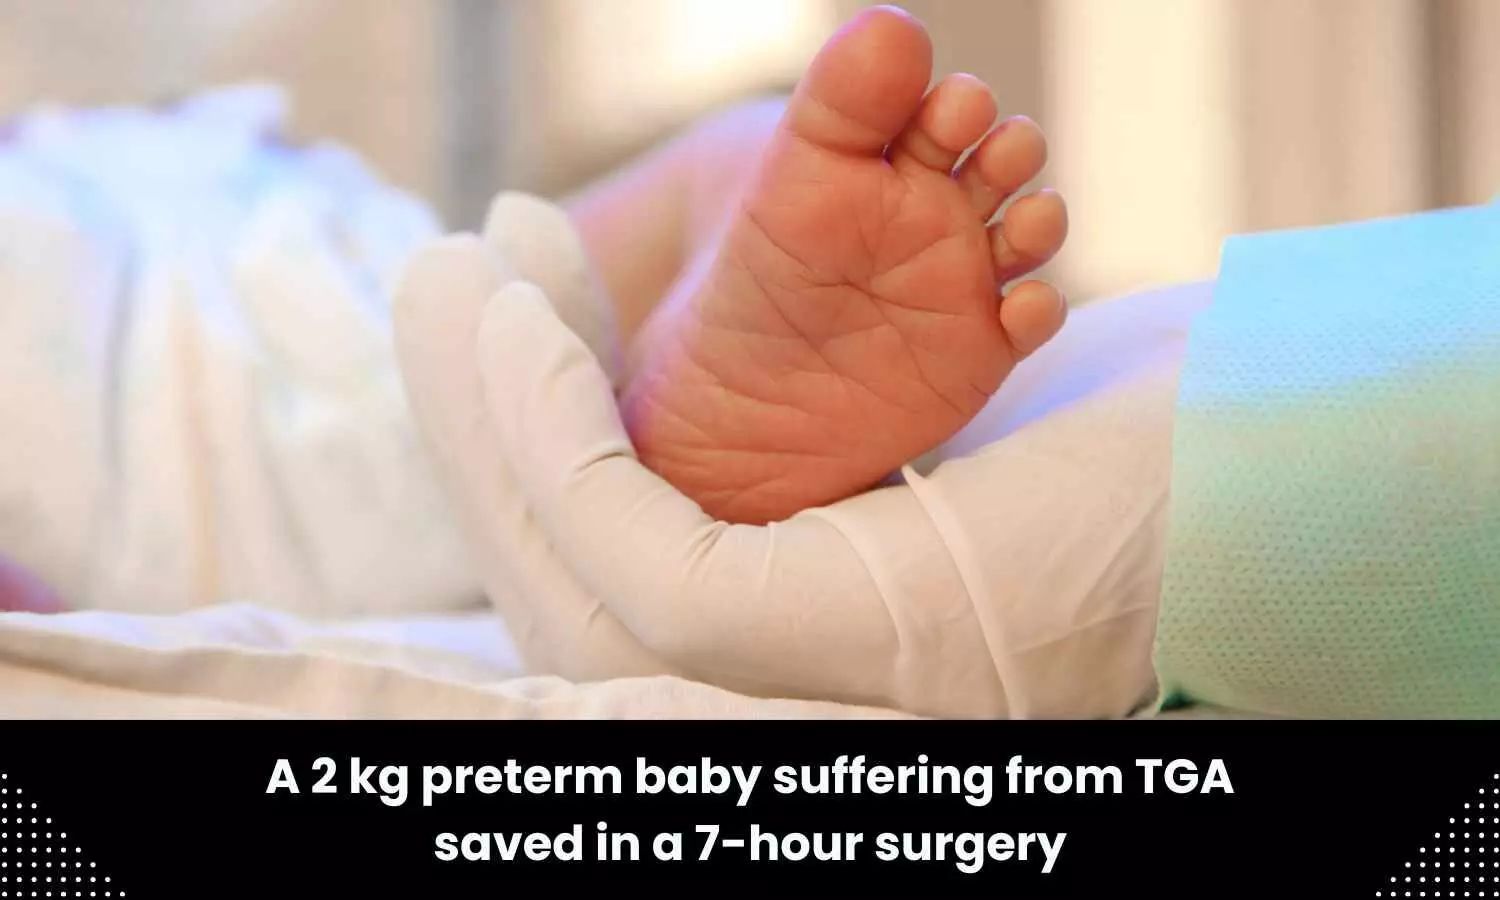 Doctors save 2 kg preterm baby suffering from TGA